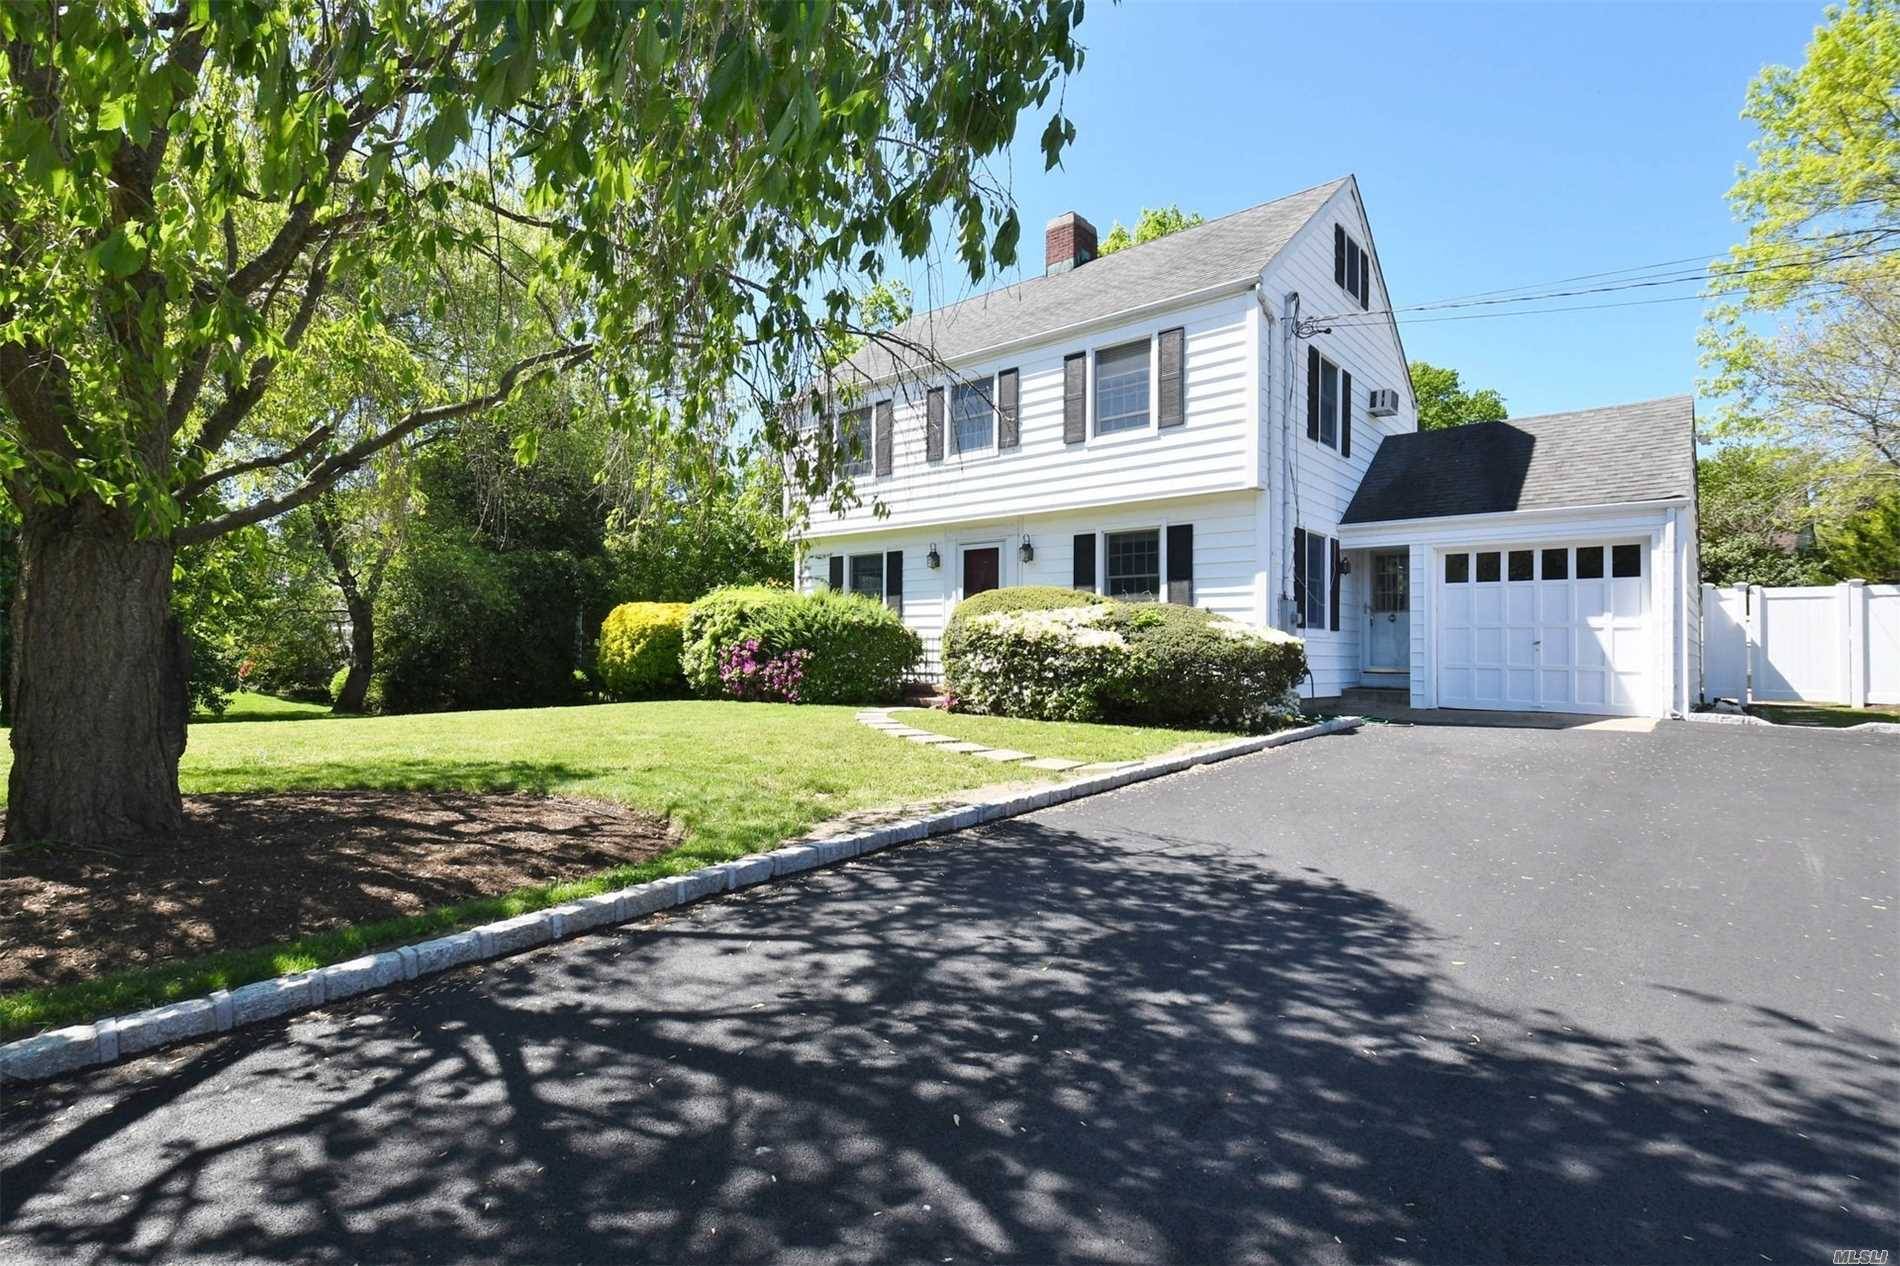 Classic Huntington Village Colonial with an Entertainer's property is a rare find.